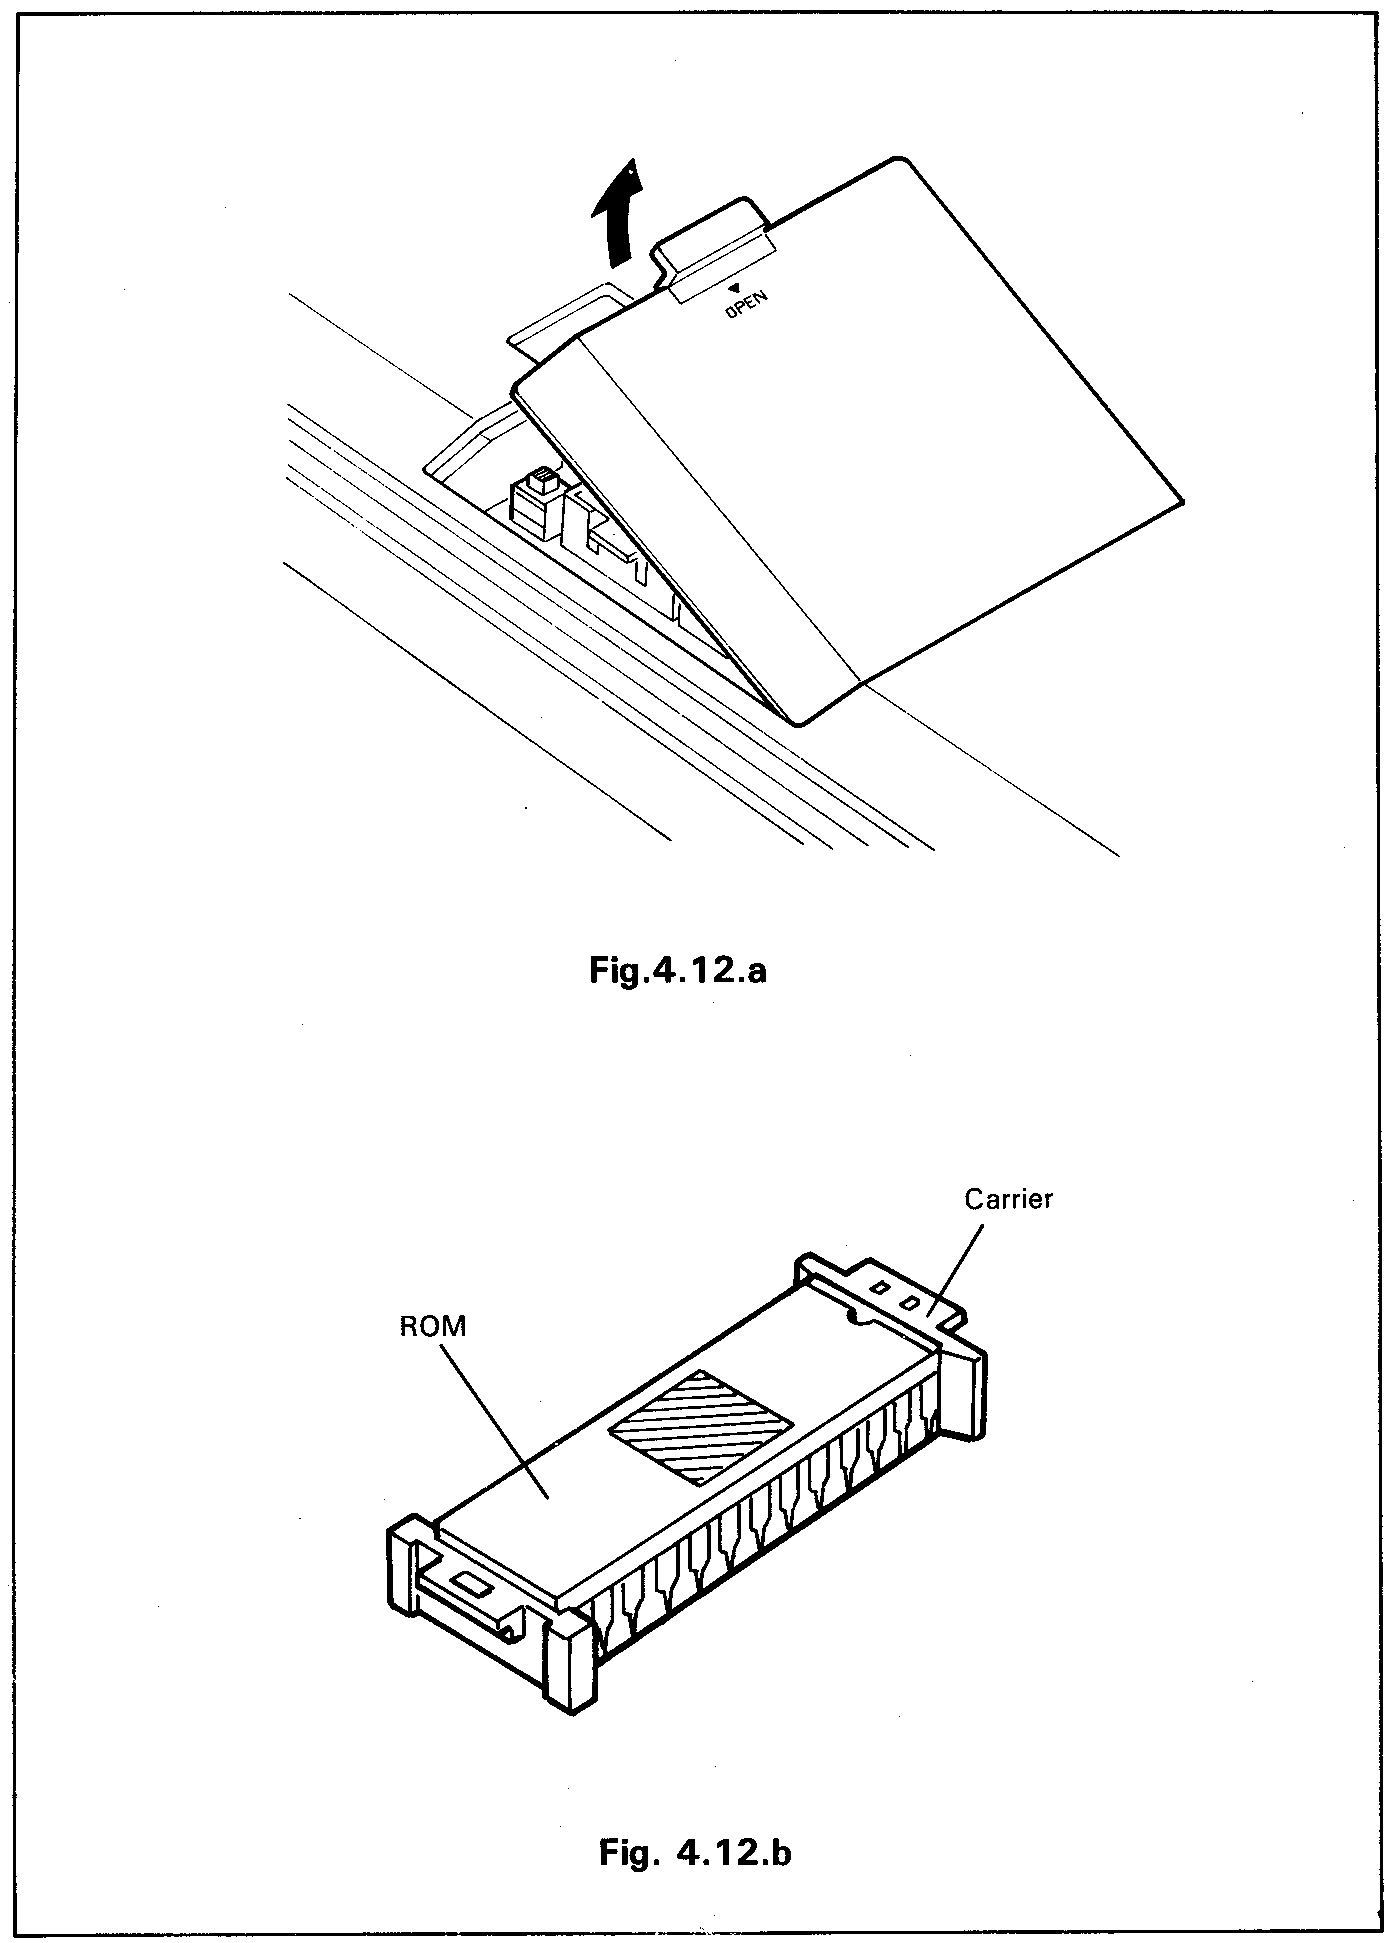 Fig. 4.12 a&b - ROM compartment and ROM/carrier assembly